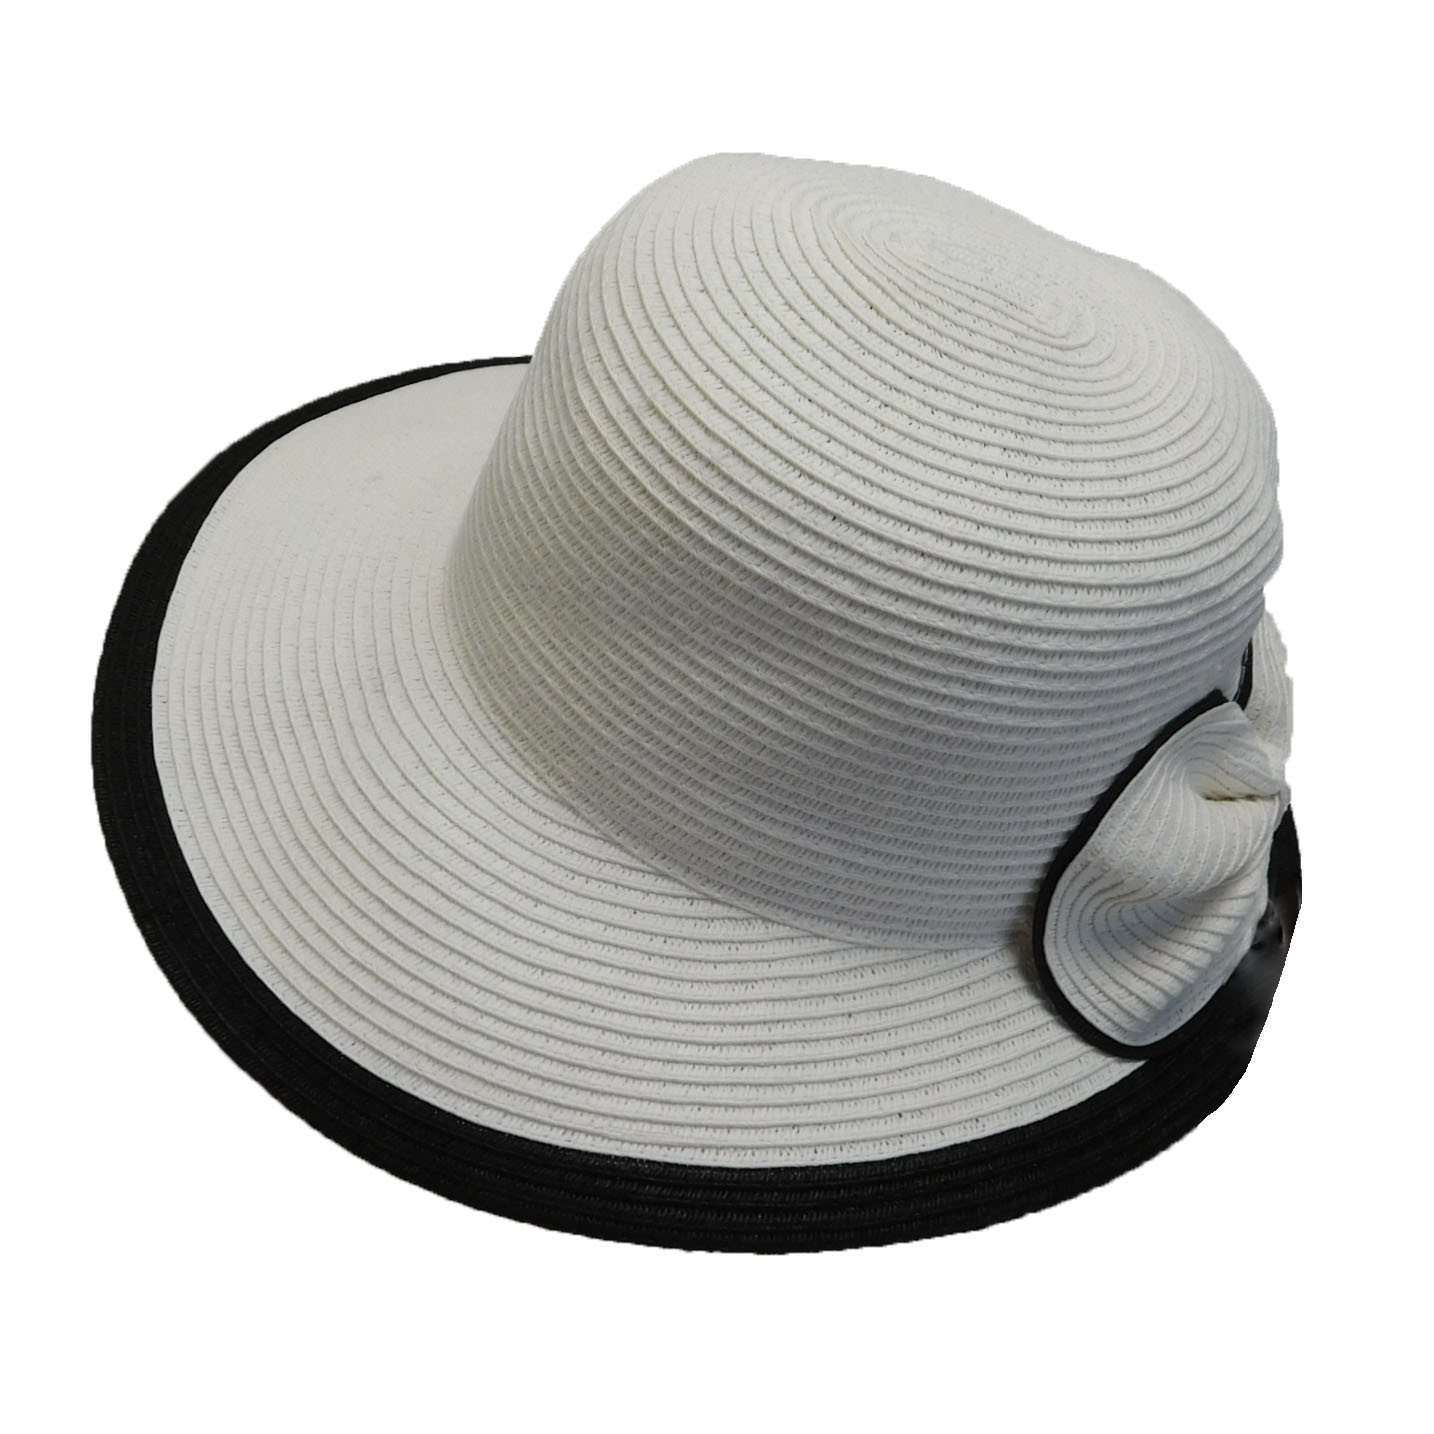 Black and White Sun Hat with Large Straw Bow - DNMC Hats, Wide Brim Hat - SetarTrading Hats 